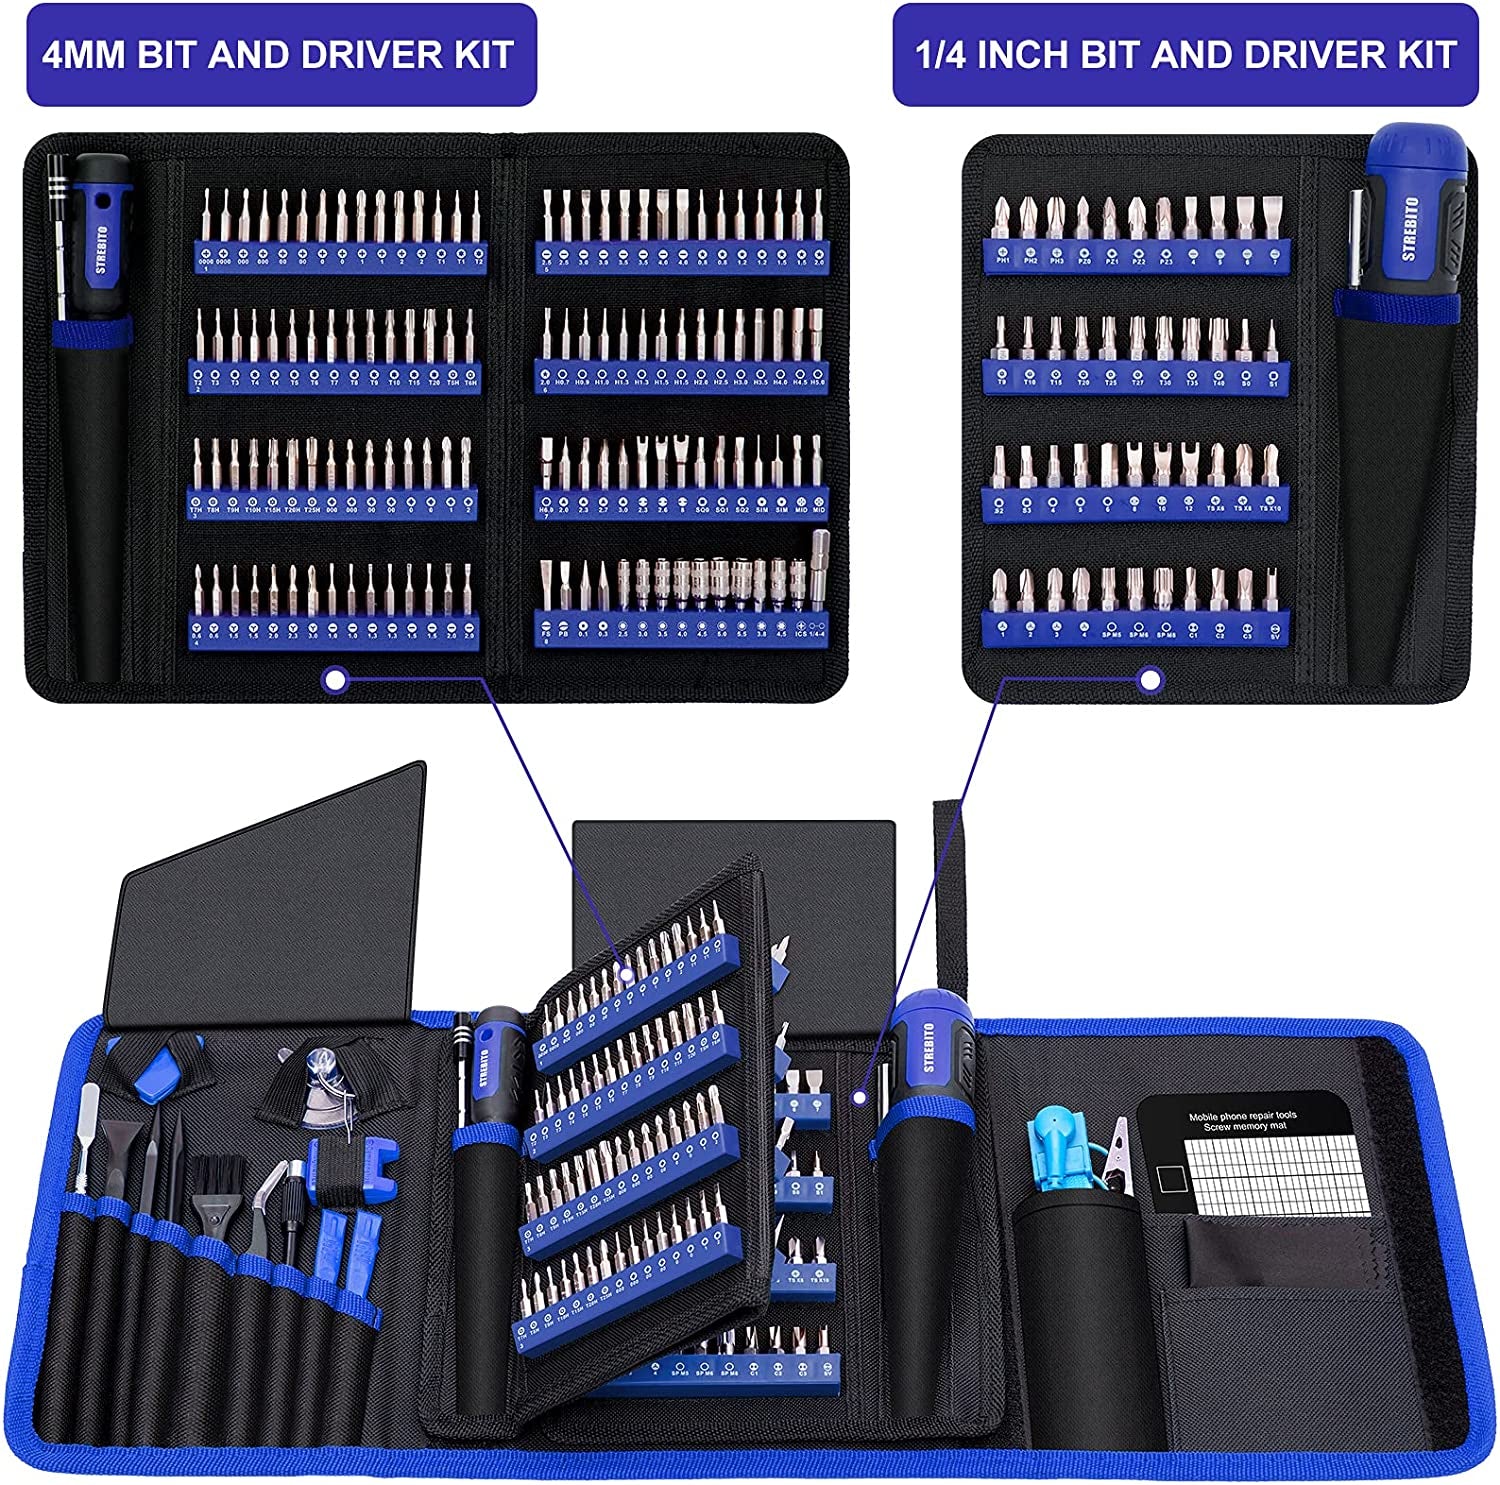 Precision Screwdriver Set 191-Piece Multi-Bit Screwdriver 1/4 Inch Nut Driver Home Improvement Tool Electronic Repair Kit for Computer, Iphone, Laptop, PC, Cell Phone, PS4, Xbox, Nintendo